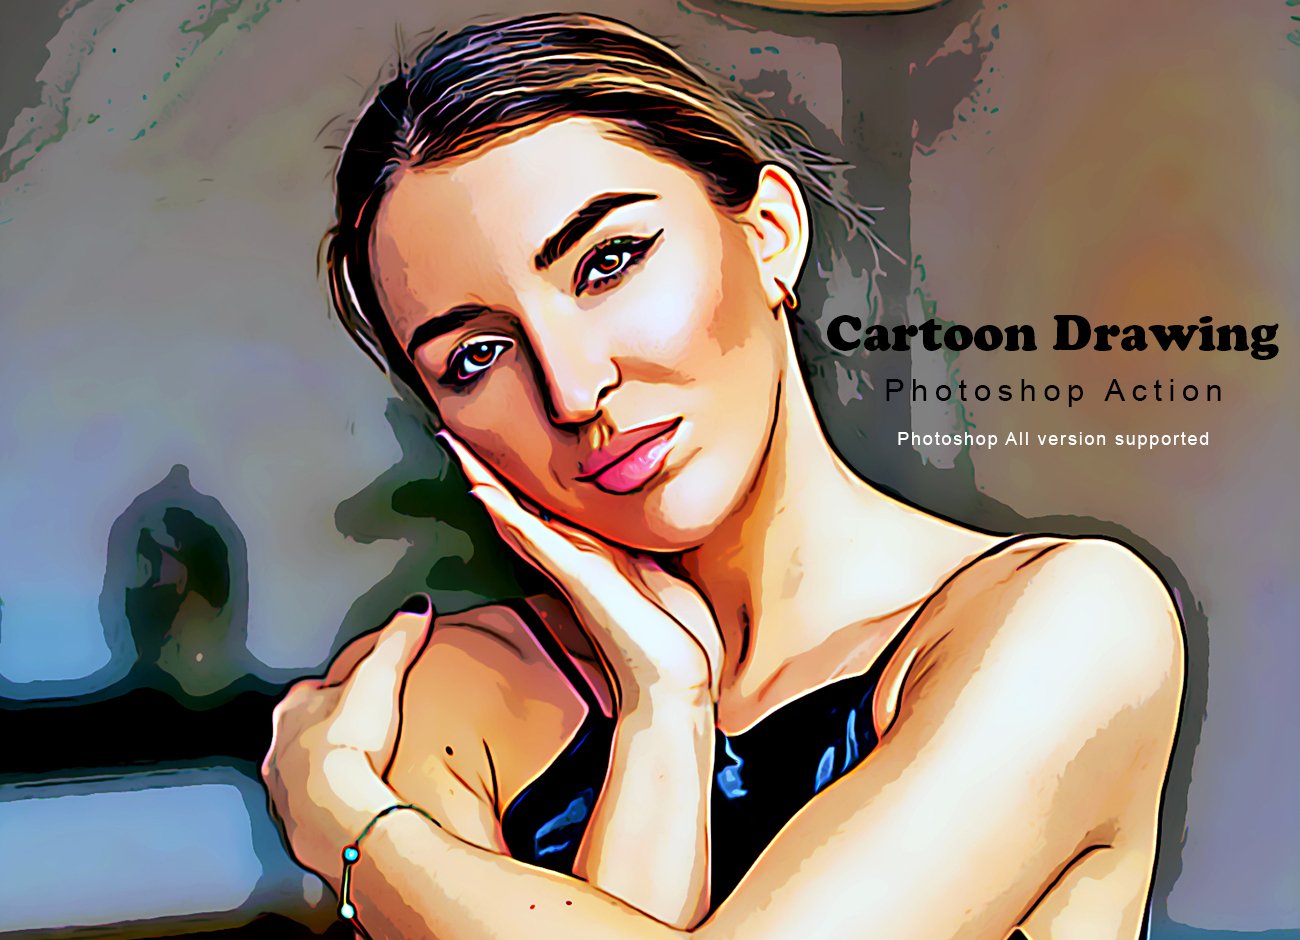 Cartoon Drawing Photoshop Actioncover image.